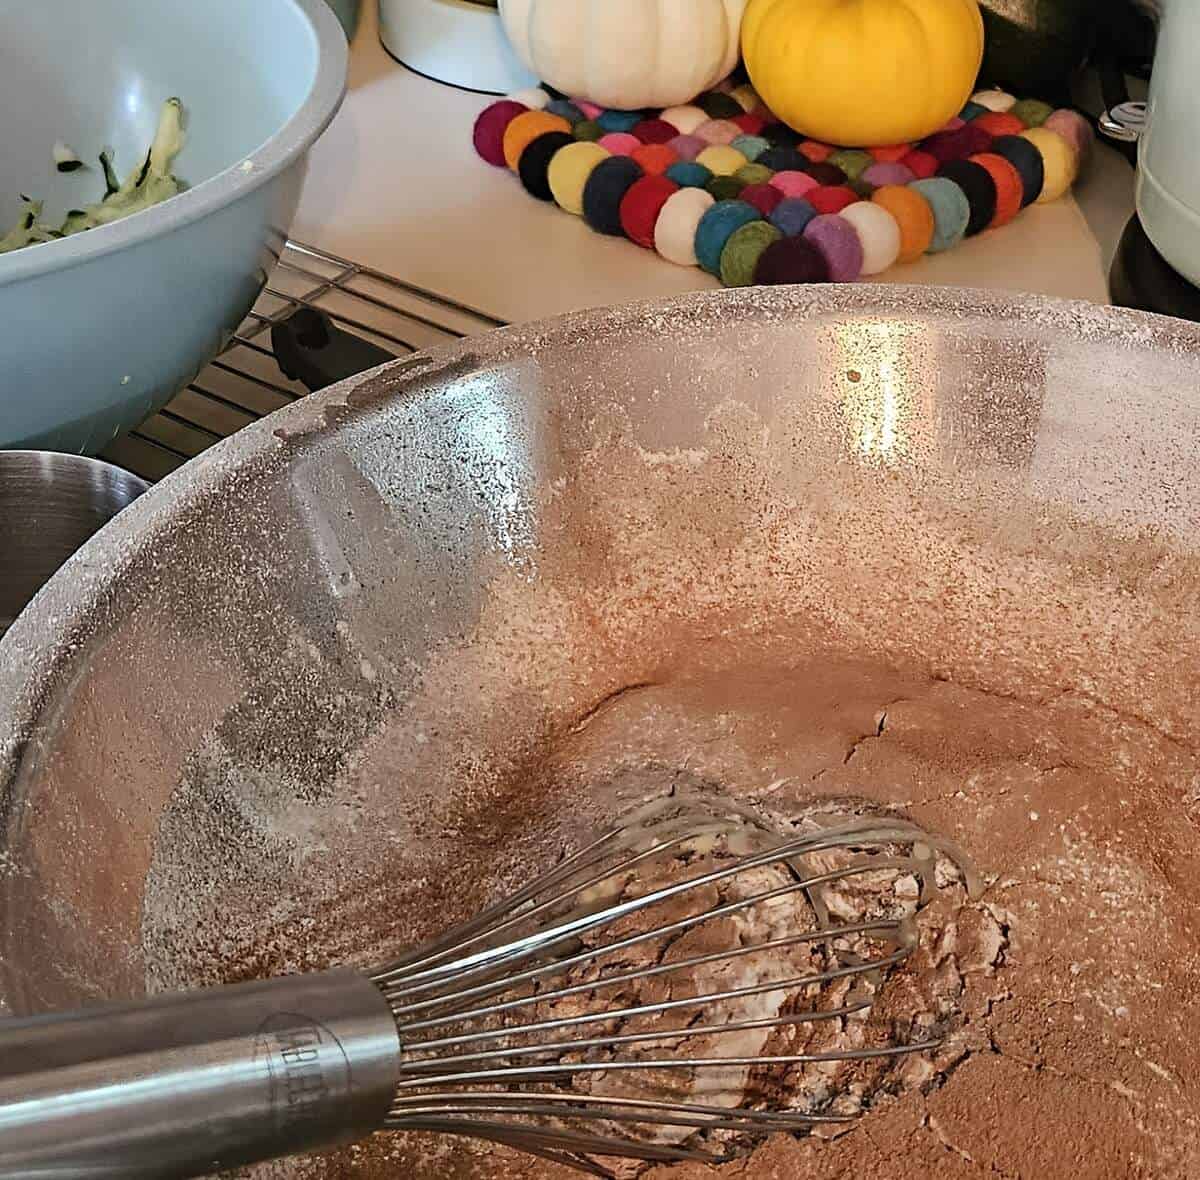 zucchini brownie batter being mixed in a bowl with a wire whip, shredded zucchini in background